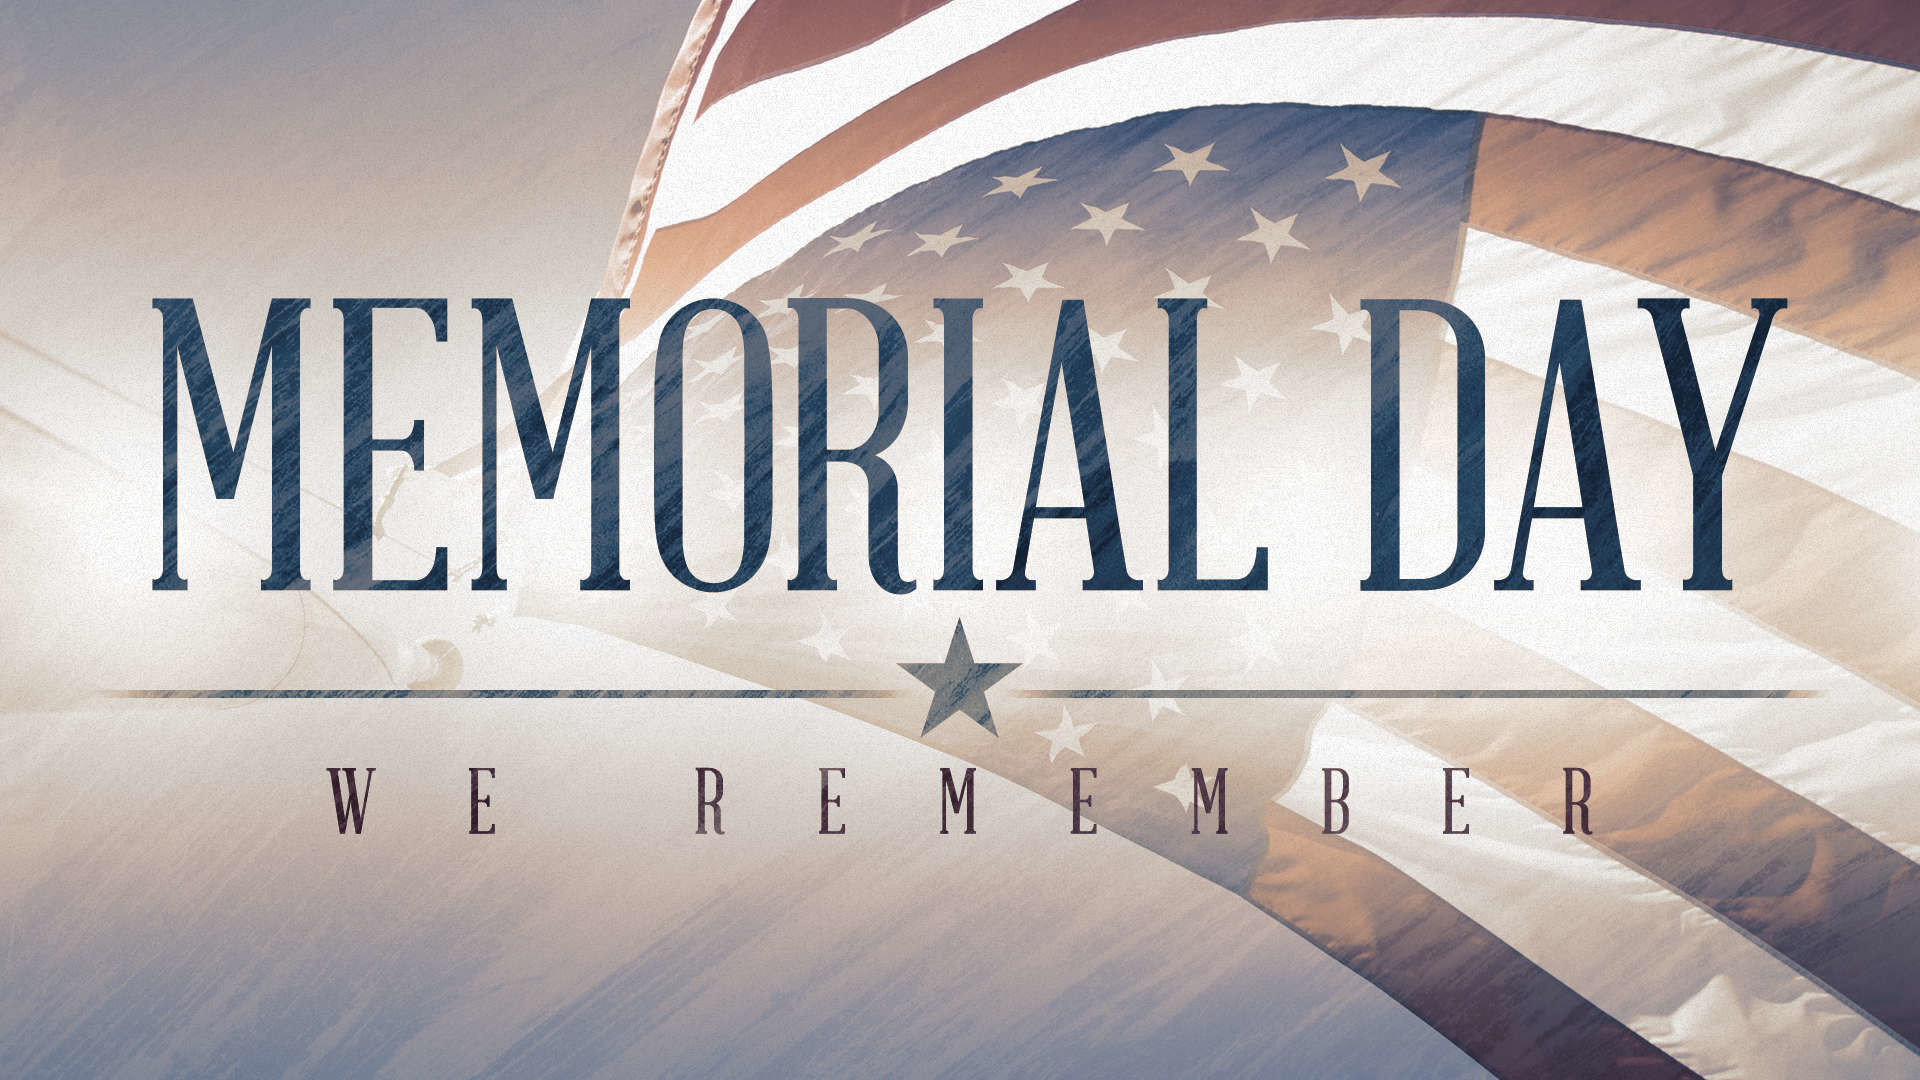 1920x1080 Happy Memorial Day Images.